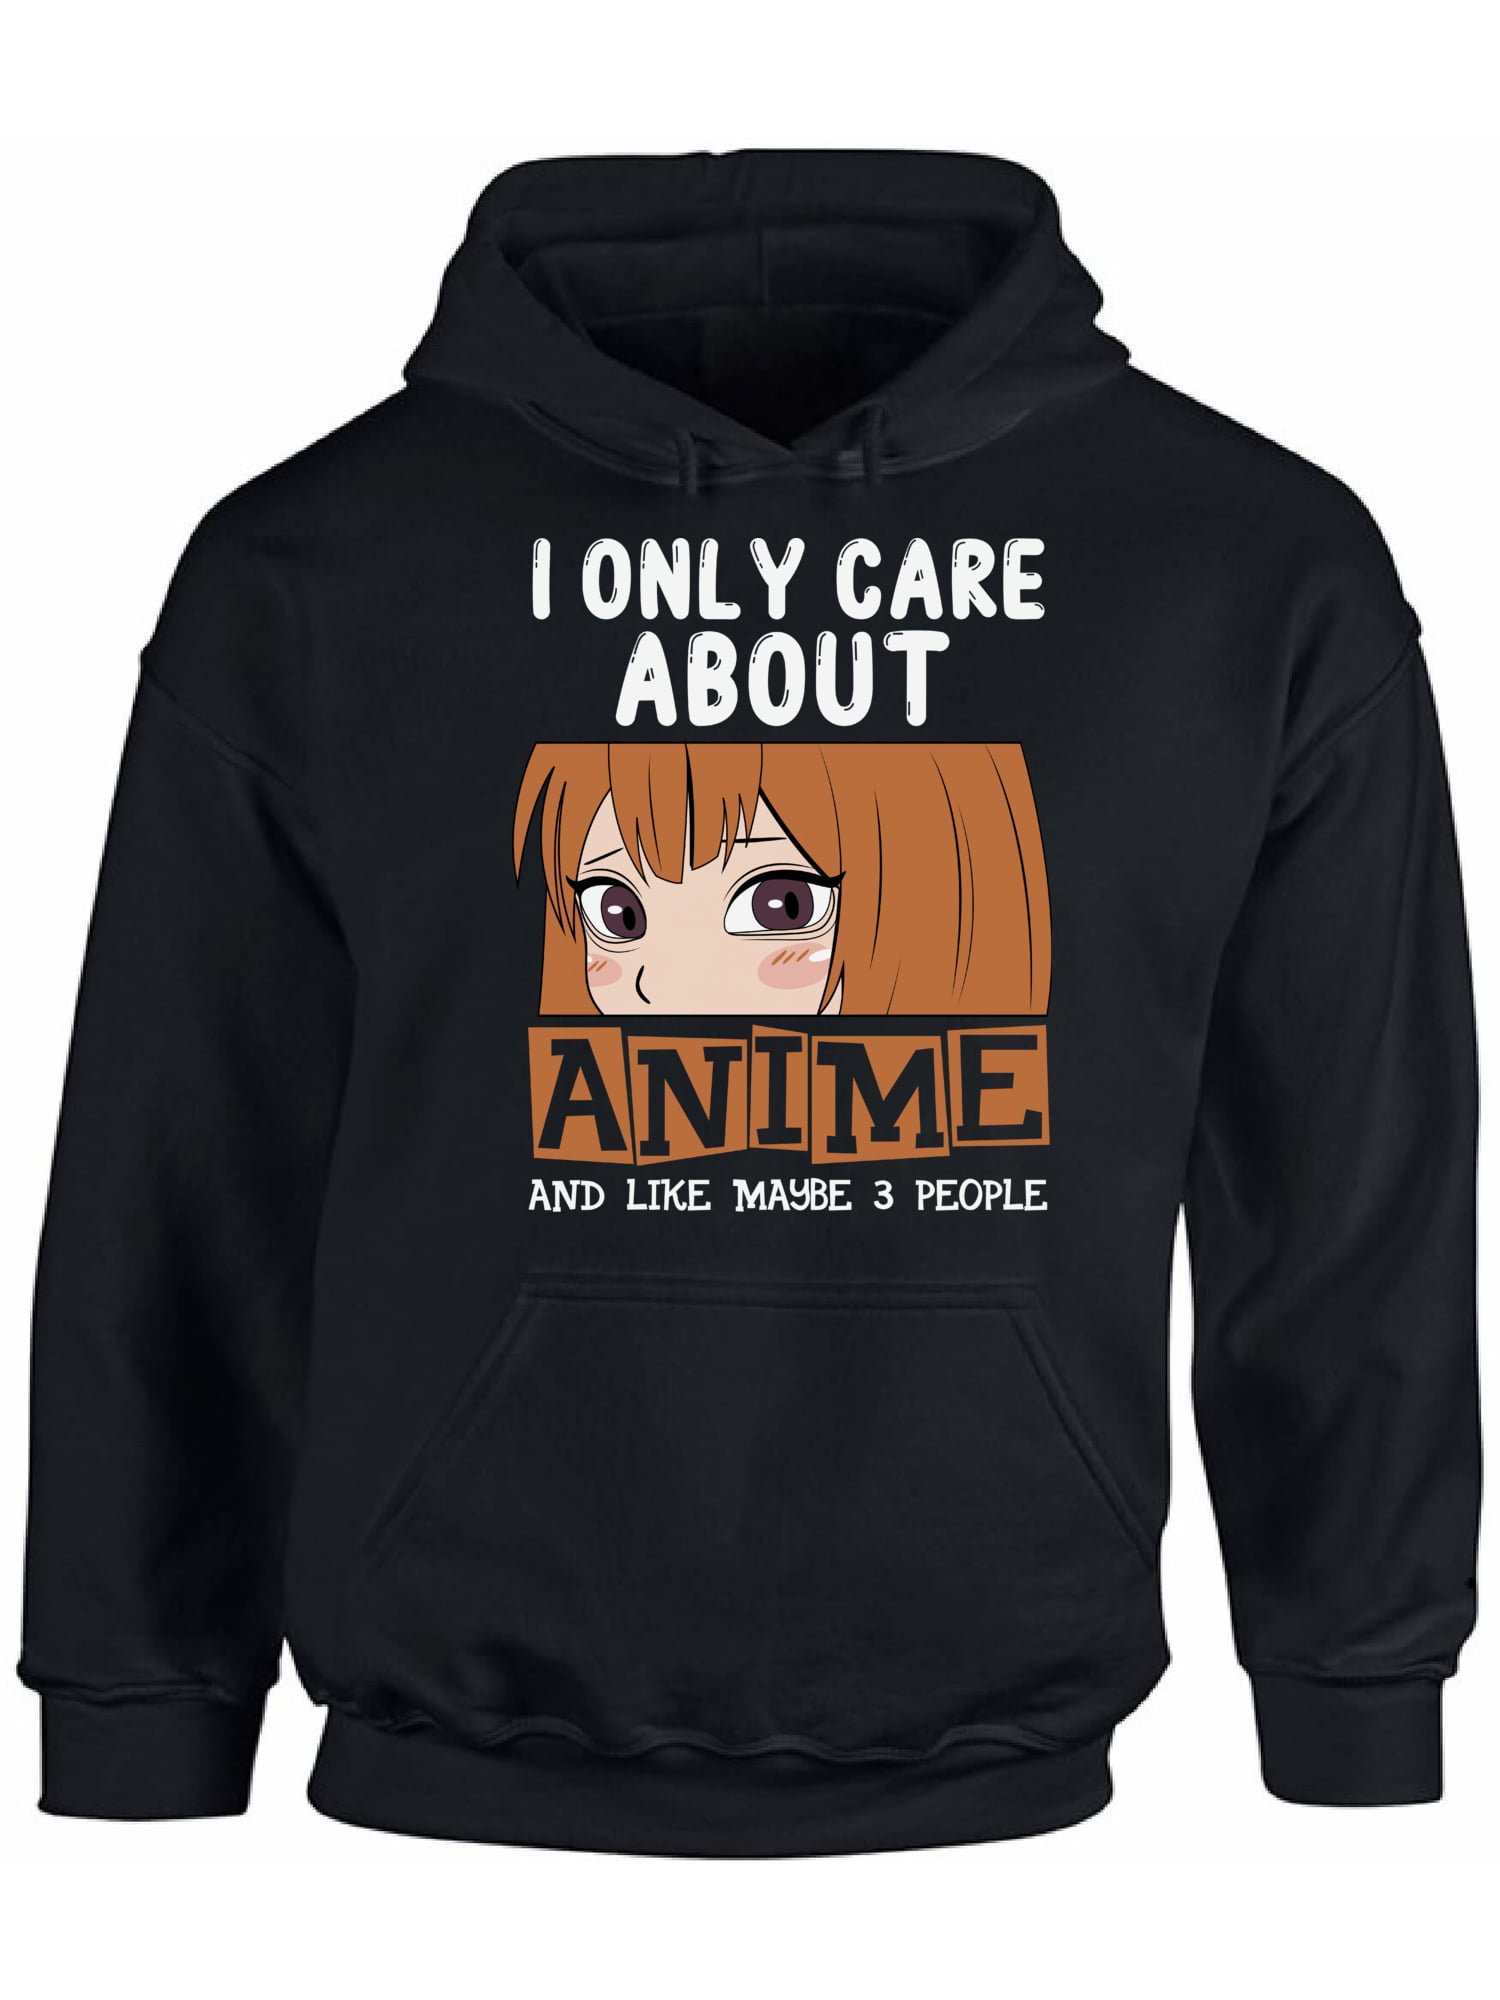 I Only Care About Anime Hooded Sweatshirt Anime Hoodie Humor Sweater ...